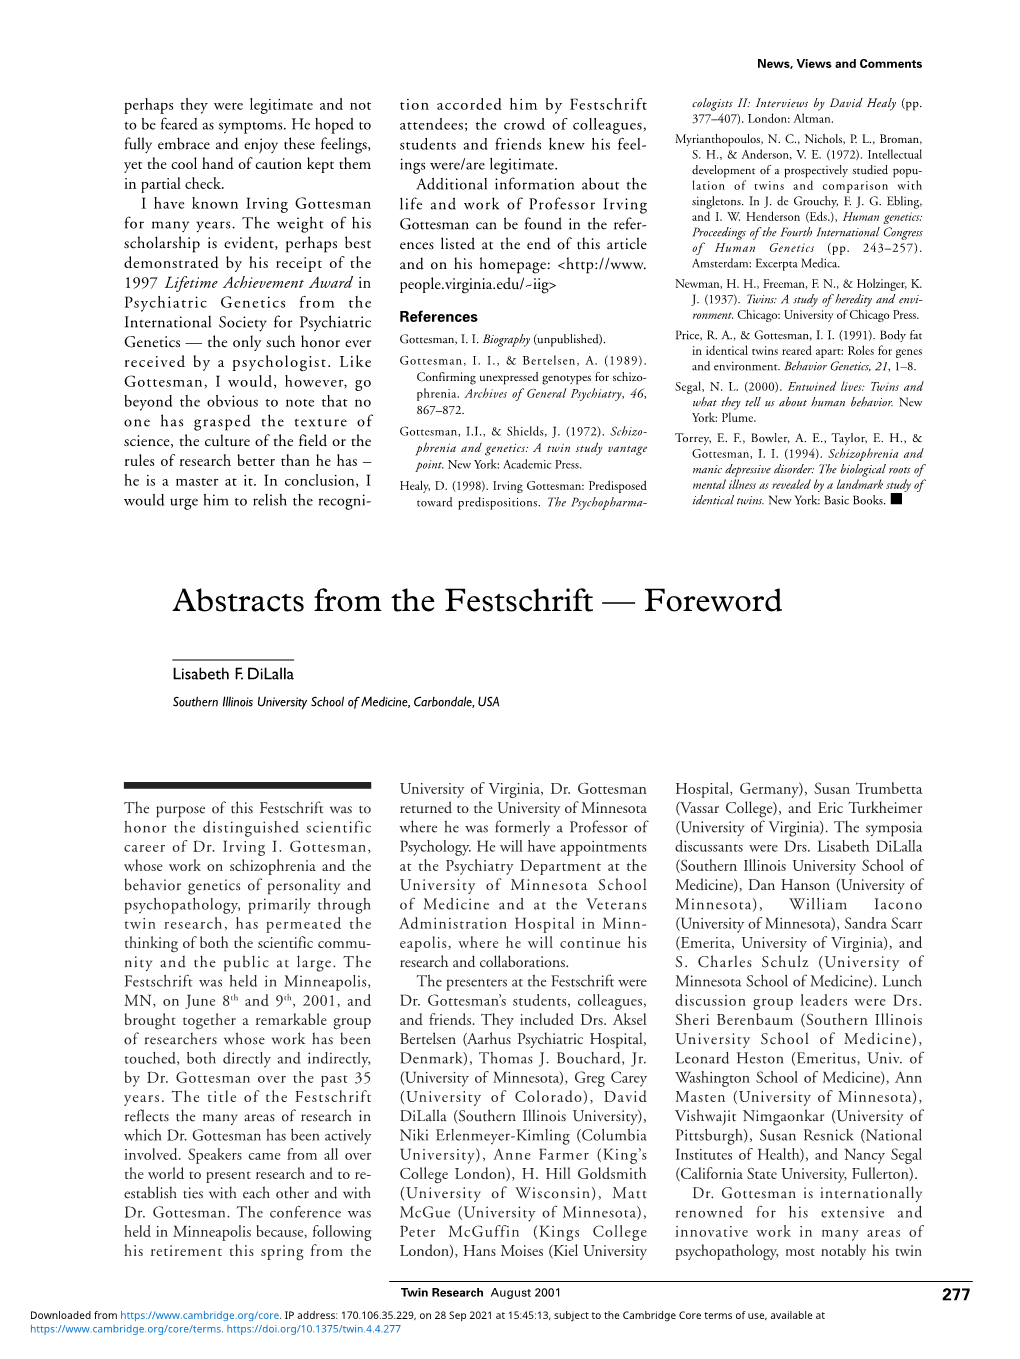 Abstracts from the Festschrift — Foreword